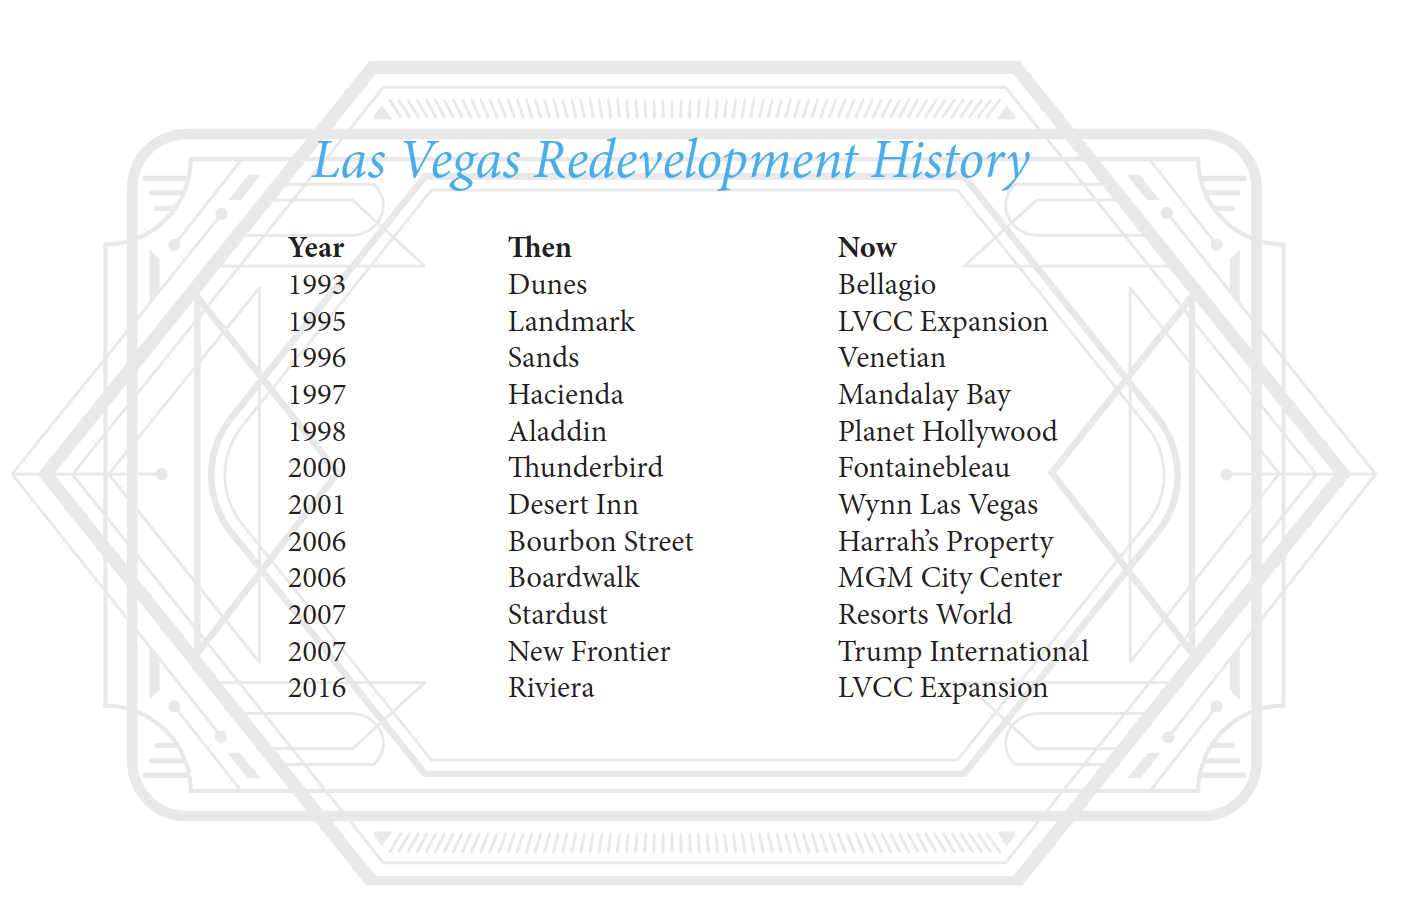 Las Vegas History: a Timeline of a Railroad Town to Gambling Mecca